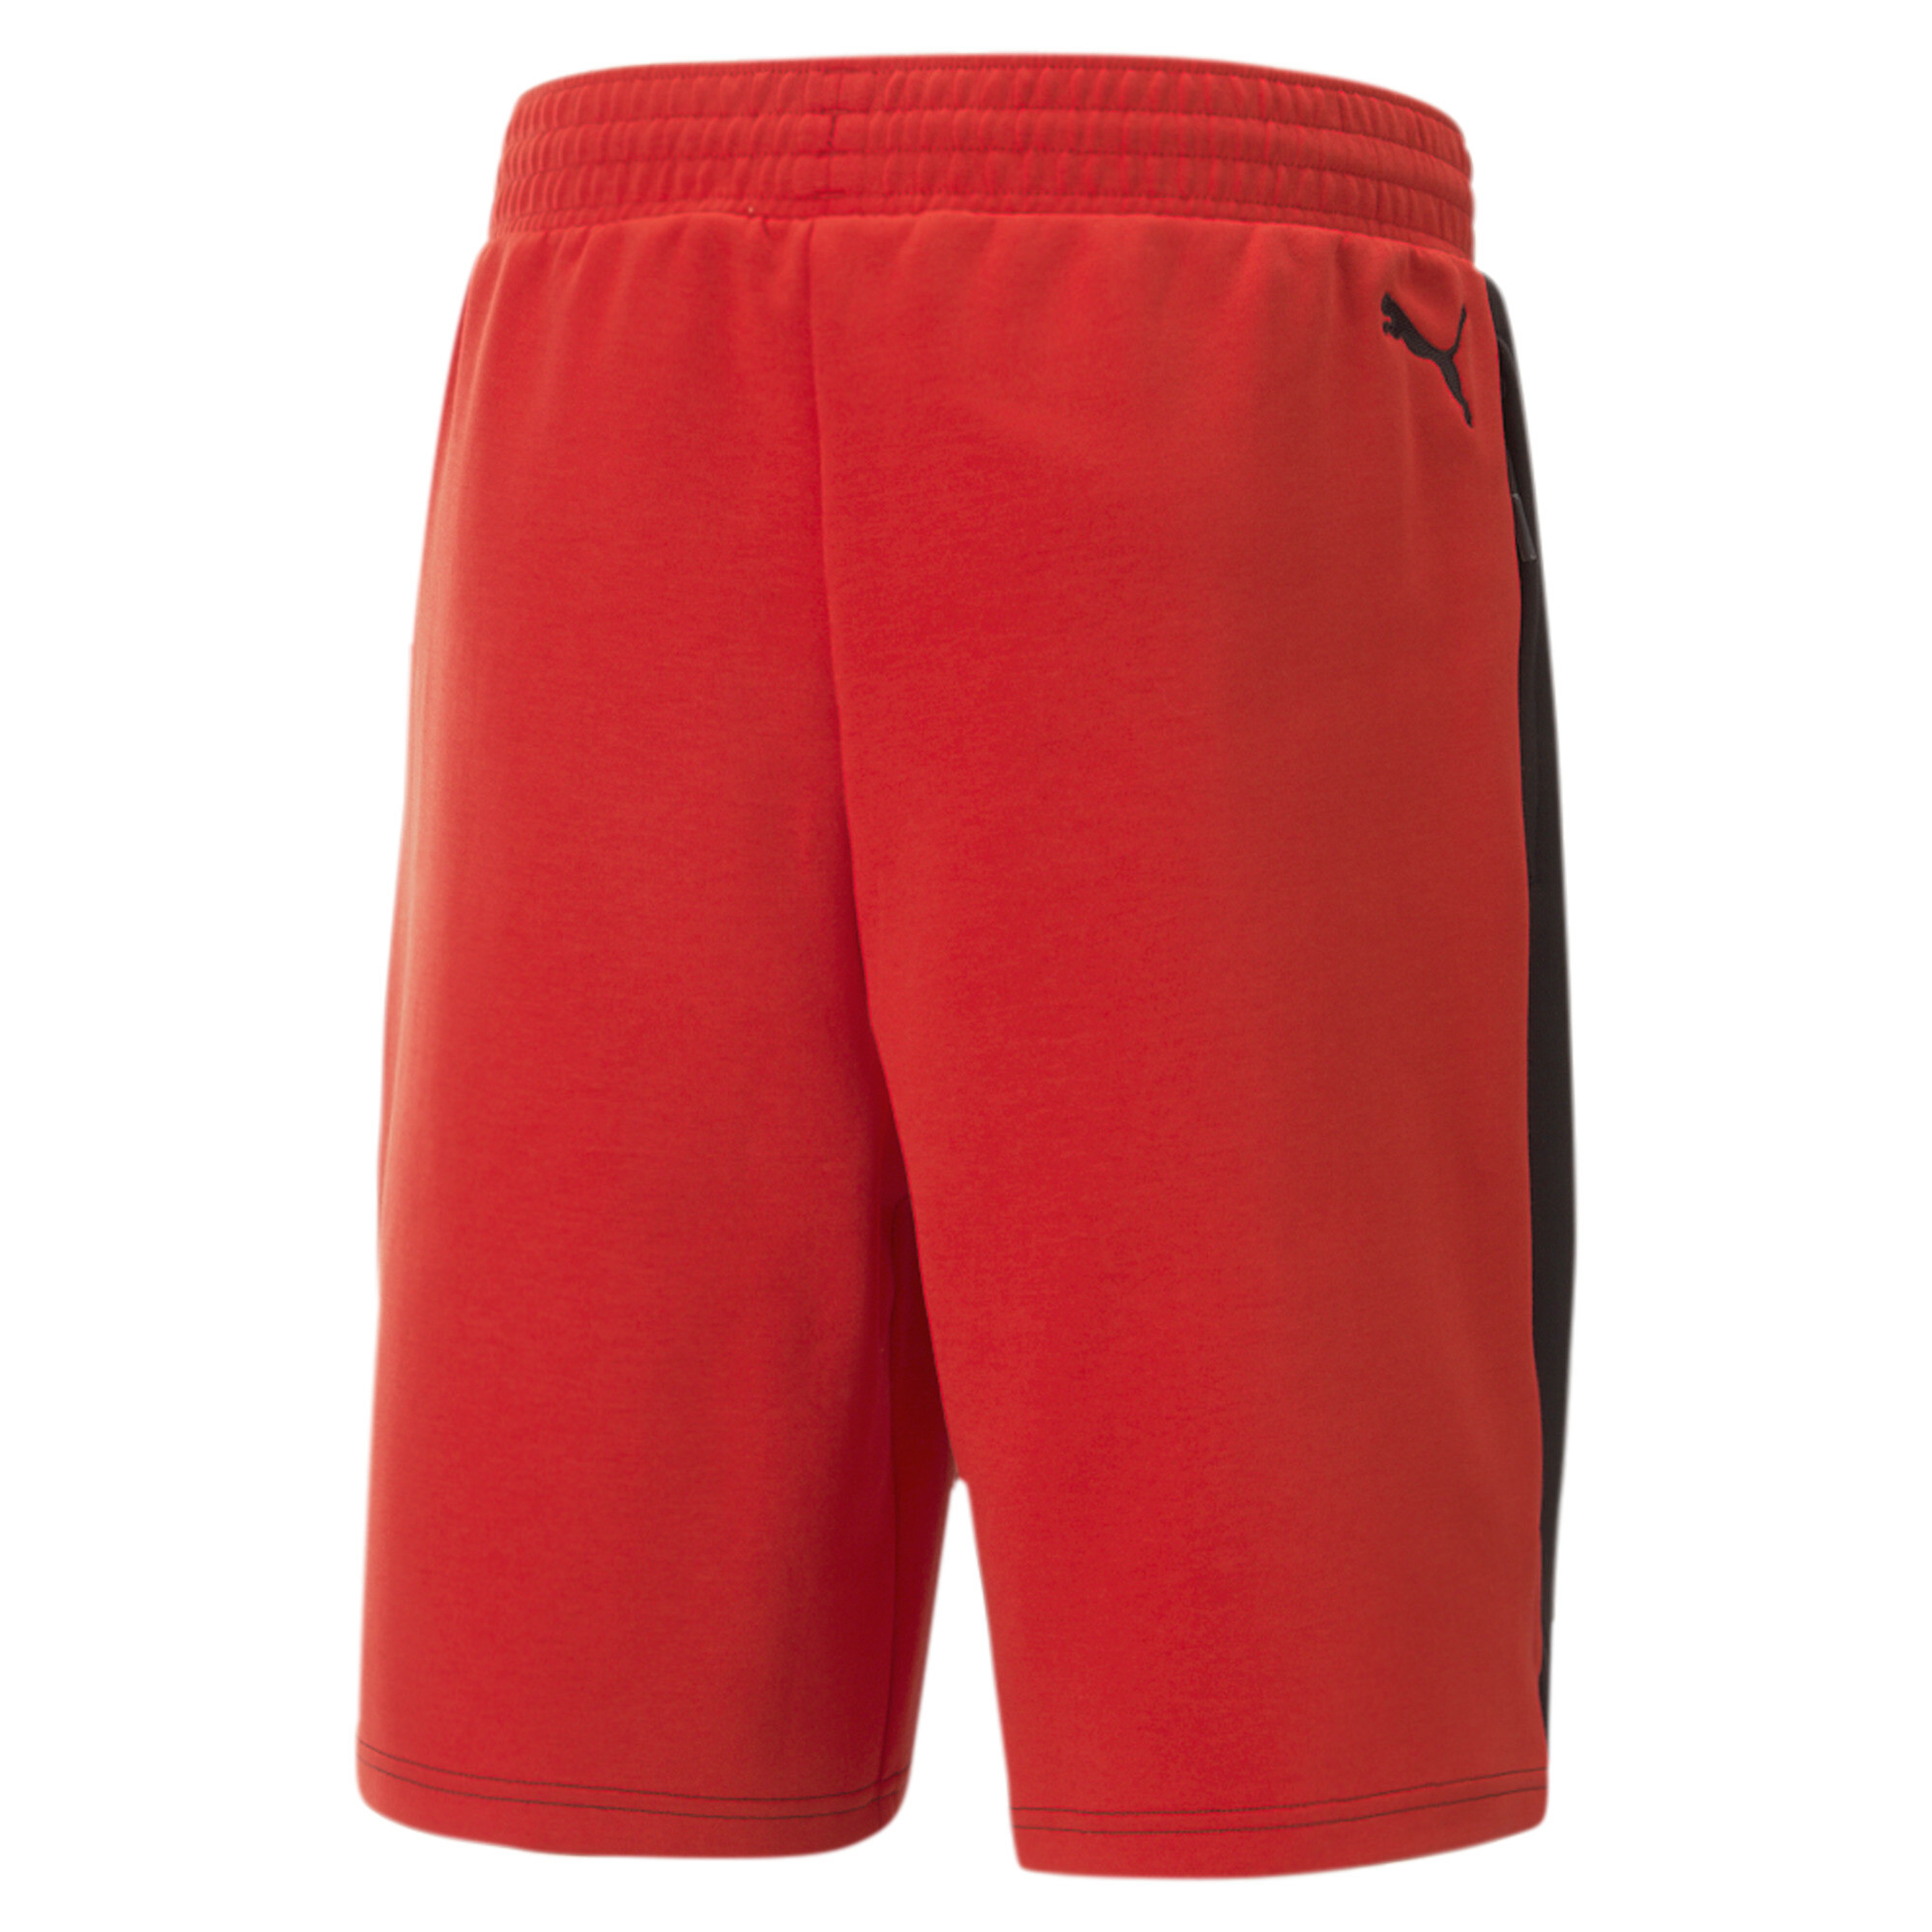 Men's PUMA X MELO Dime Shorts In Red, Size 2XL